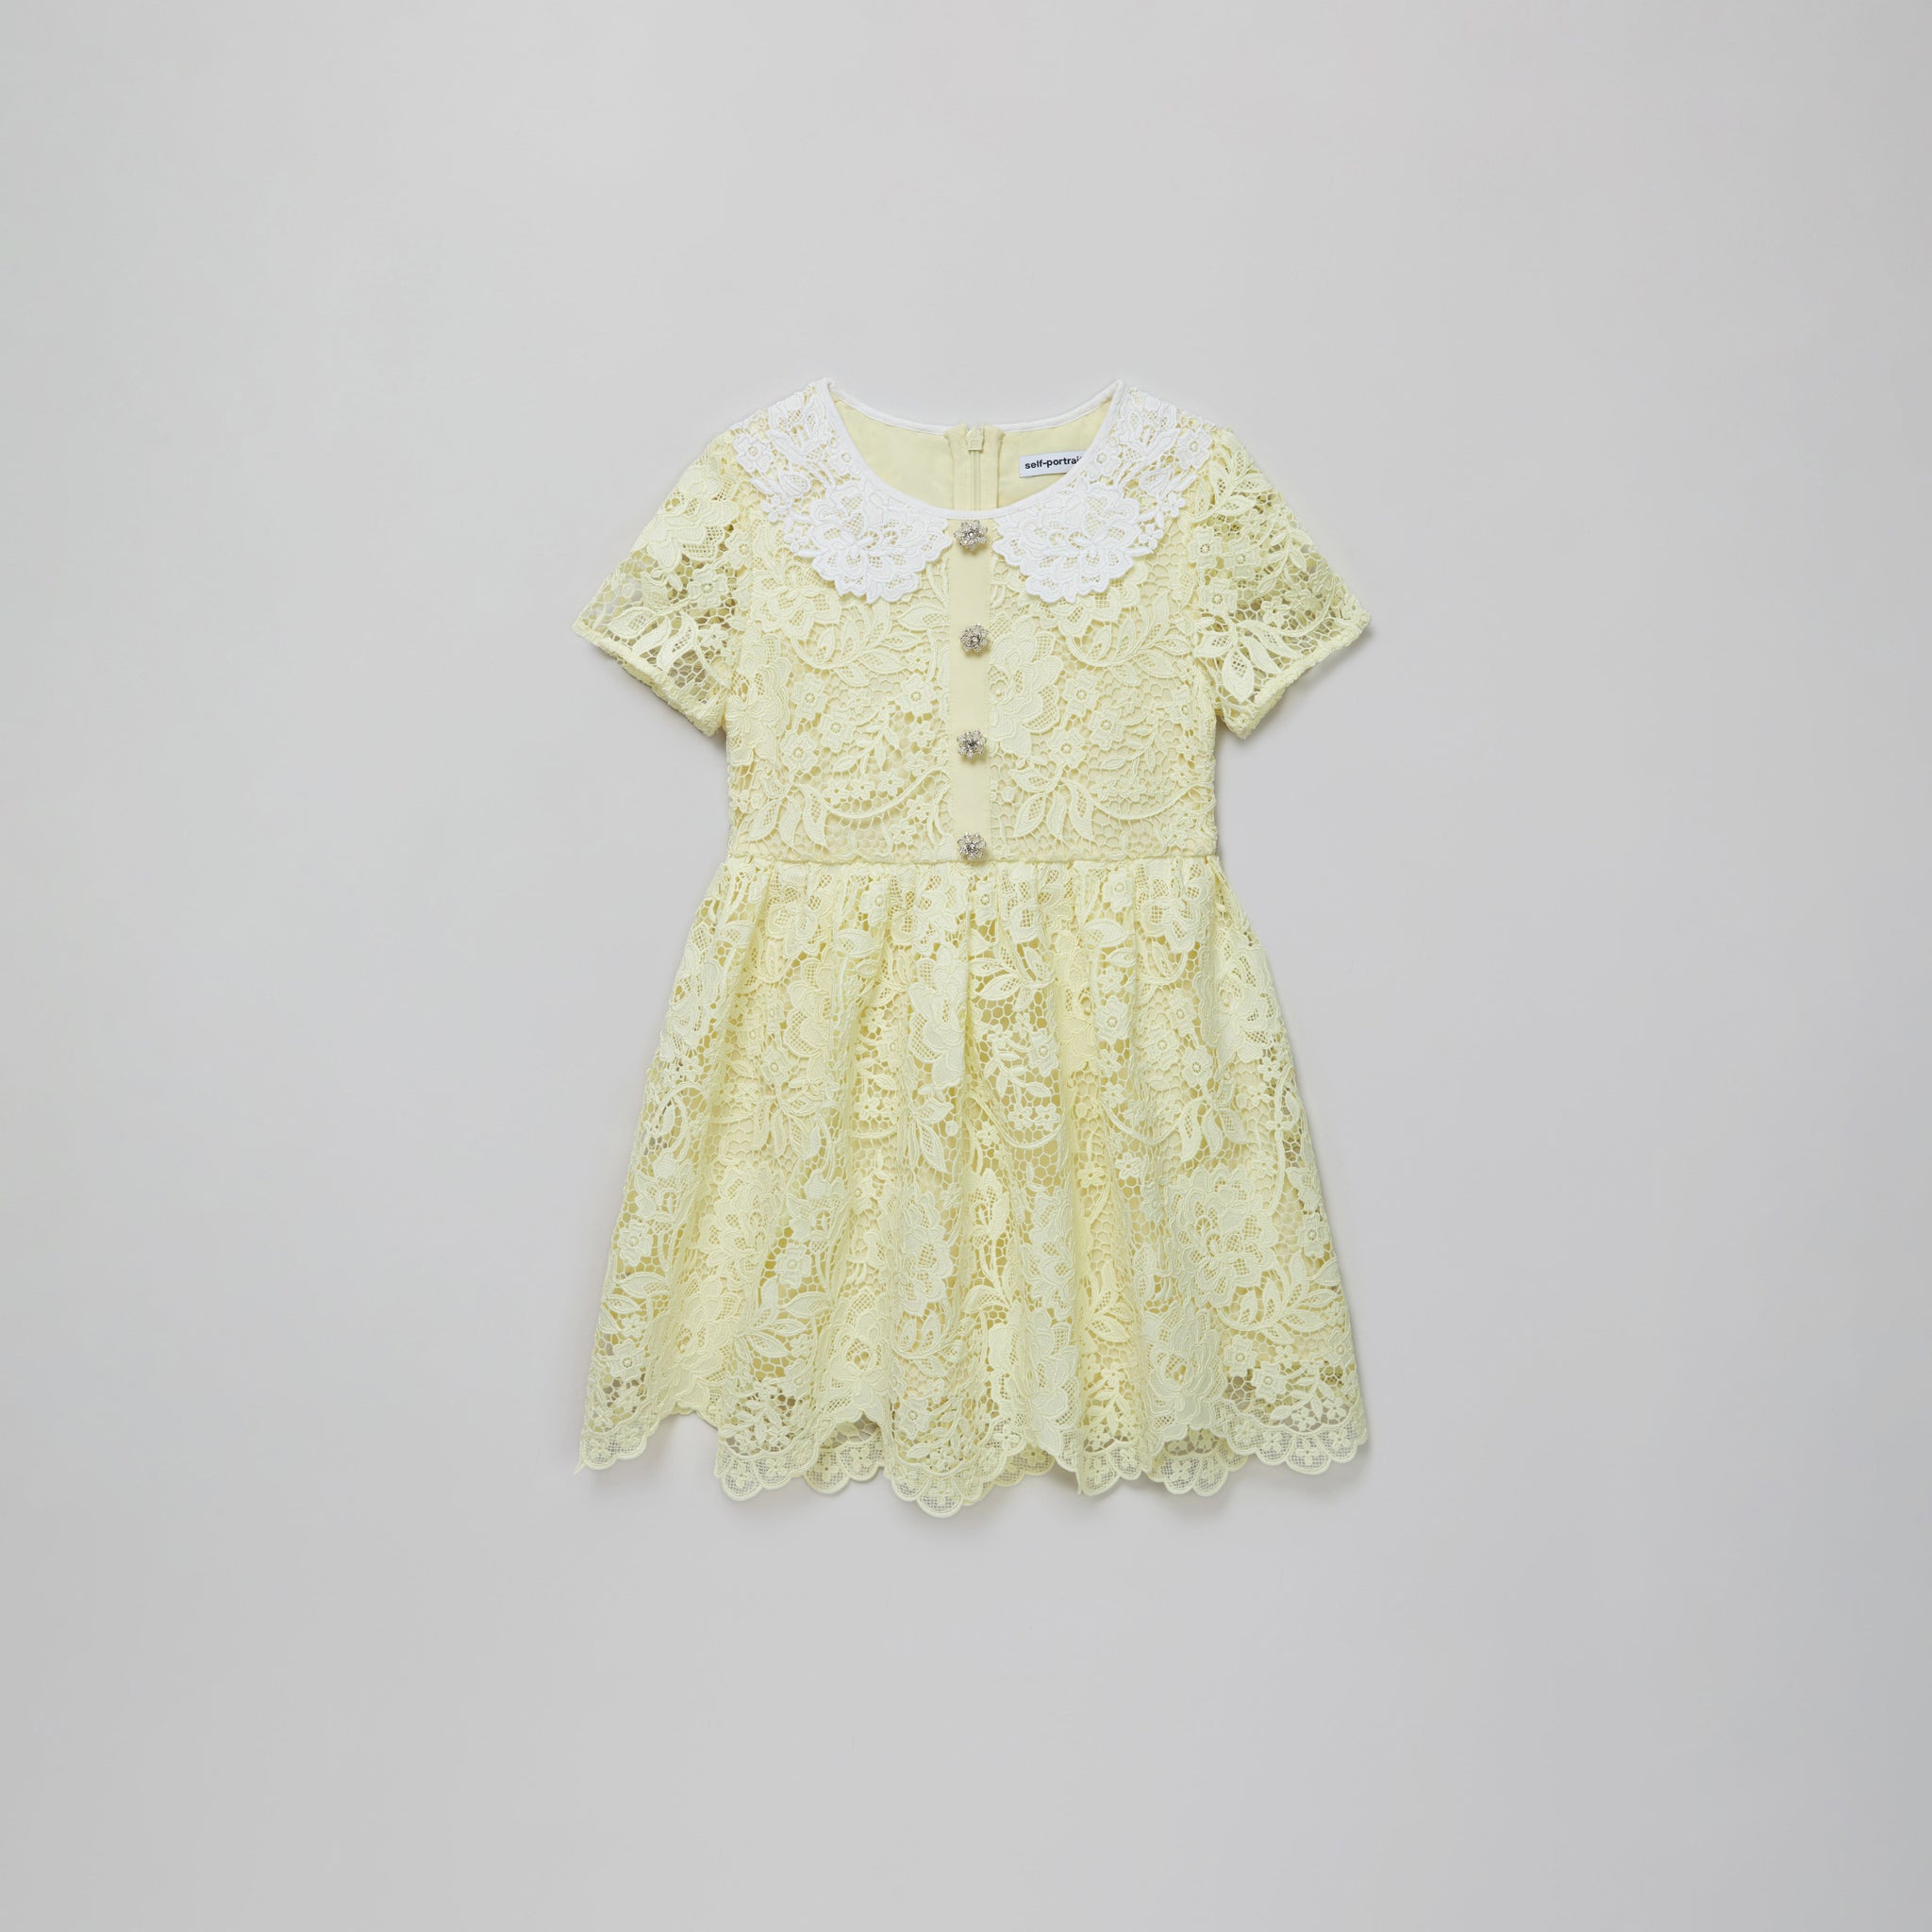 YELLOW FLORAL LACE DRESS